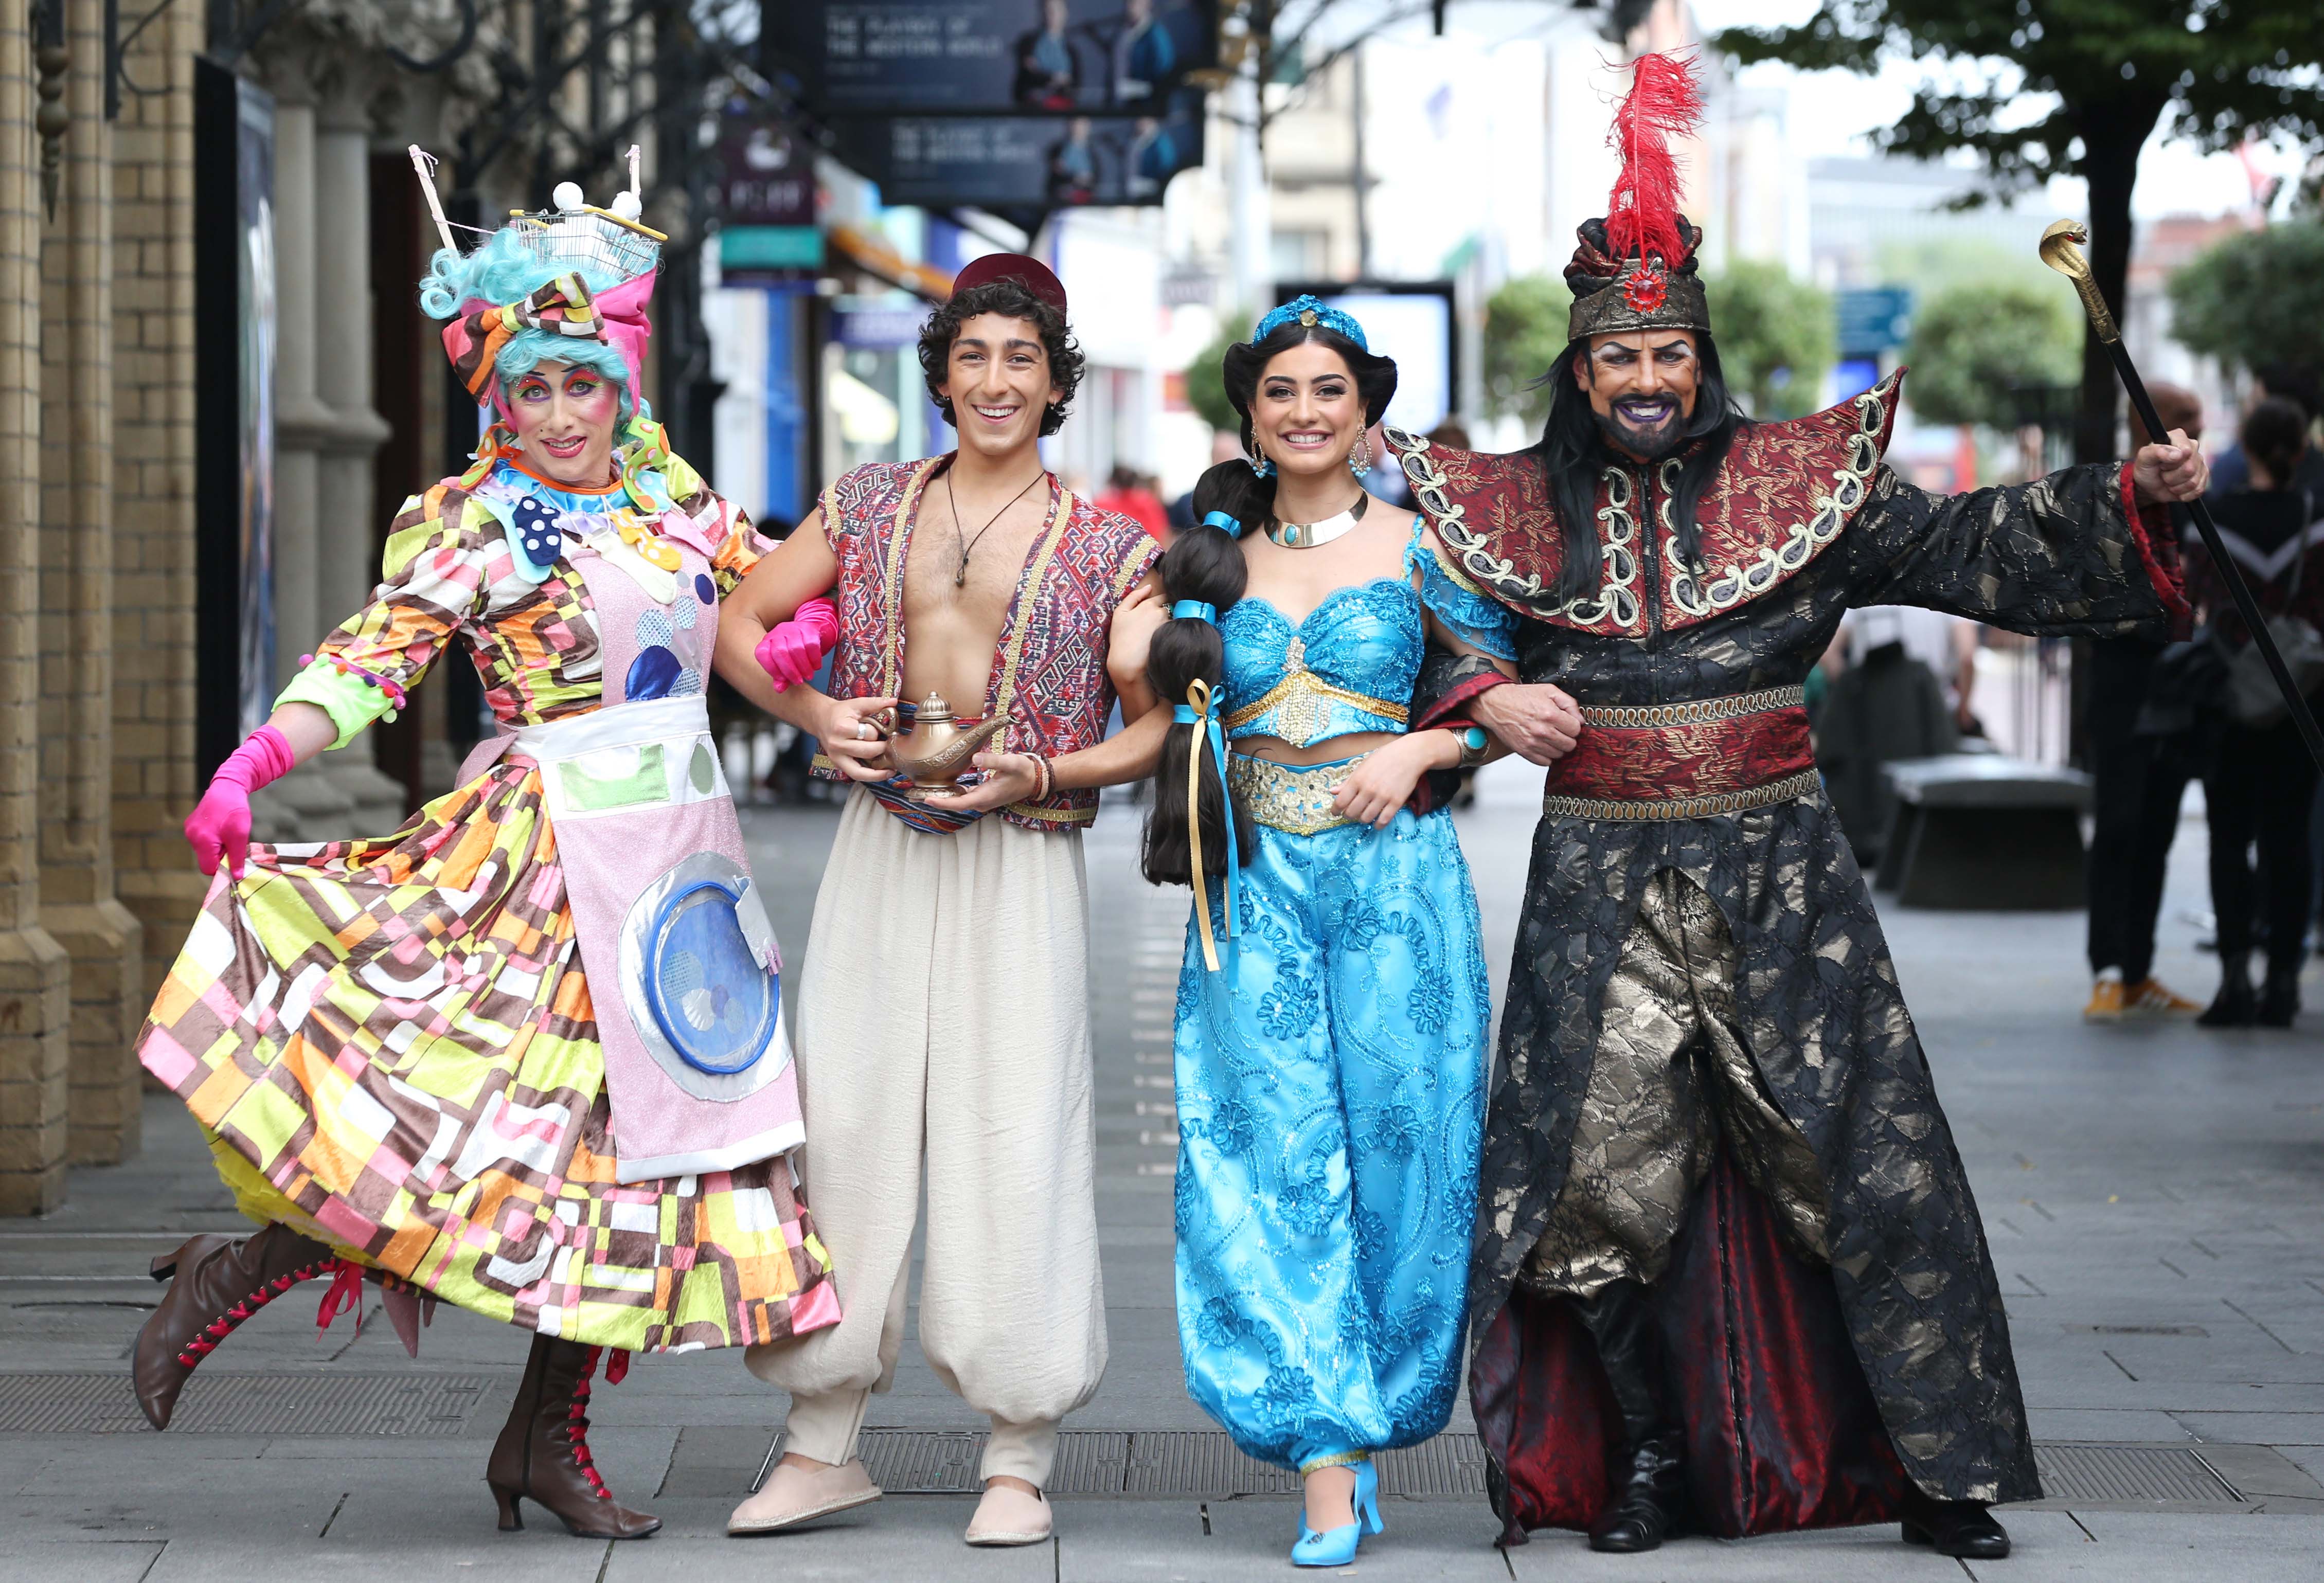 Gaiety Pantomime brings 'Aladdin' to Dublin this Christmas